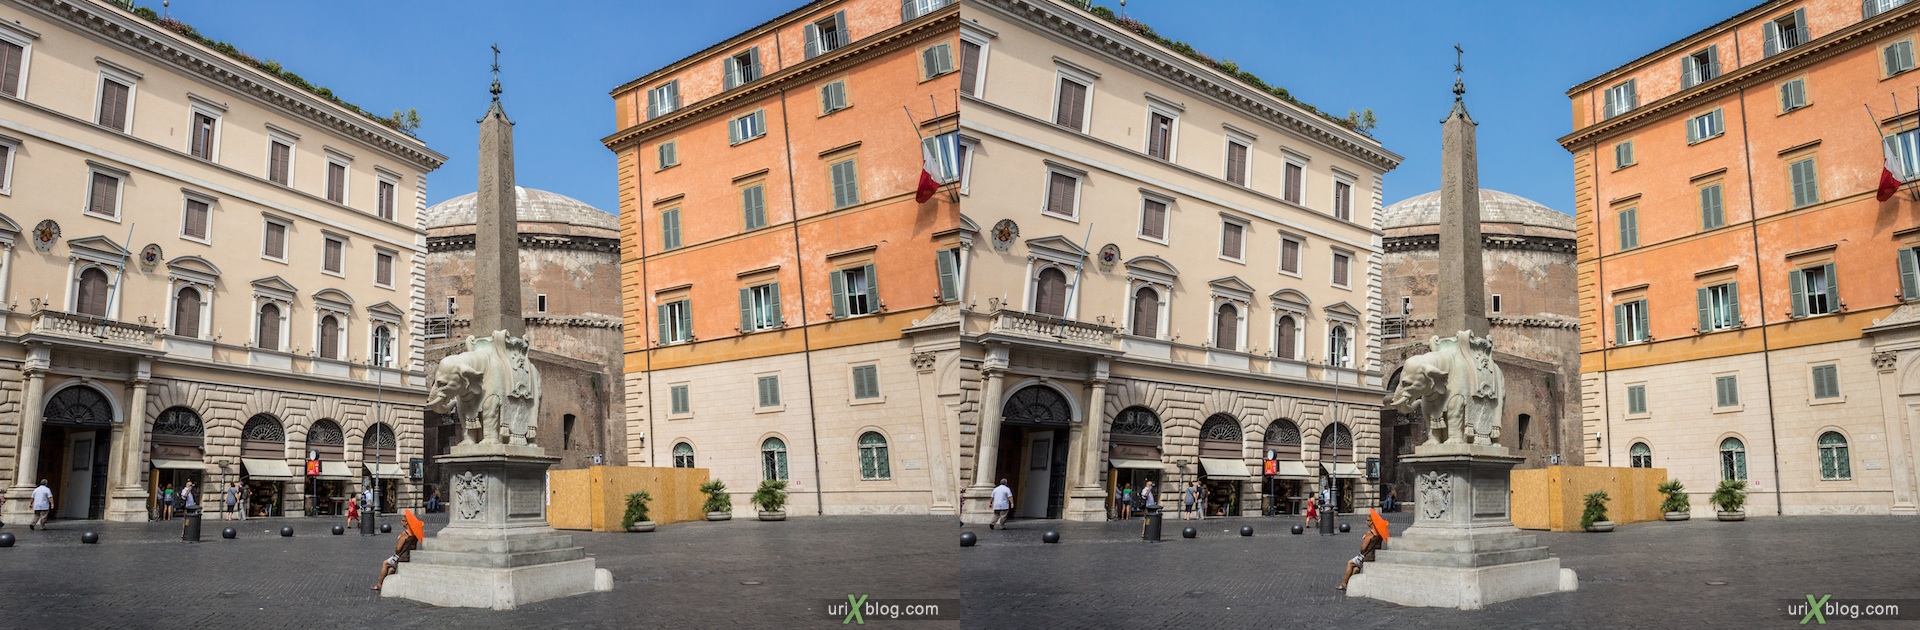 2012, Piazza della Minerva square, Bernini elephant, egyptian obelisk, Rome, Italy, 3D, stereo pair, cross-eyed, crossview, cross view stereo pair